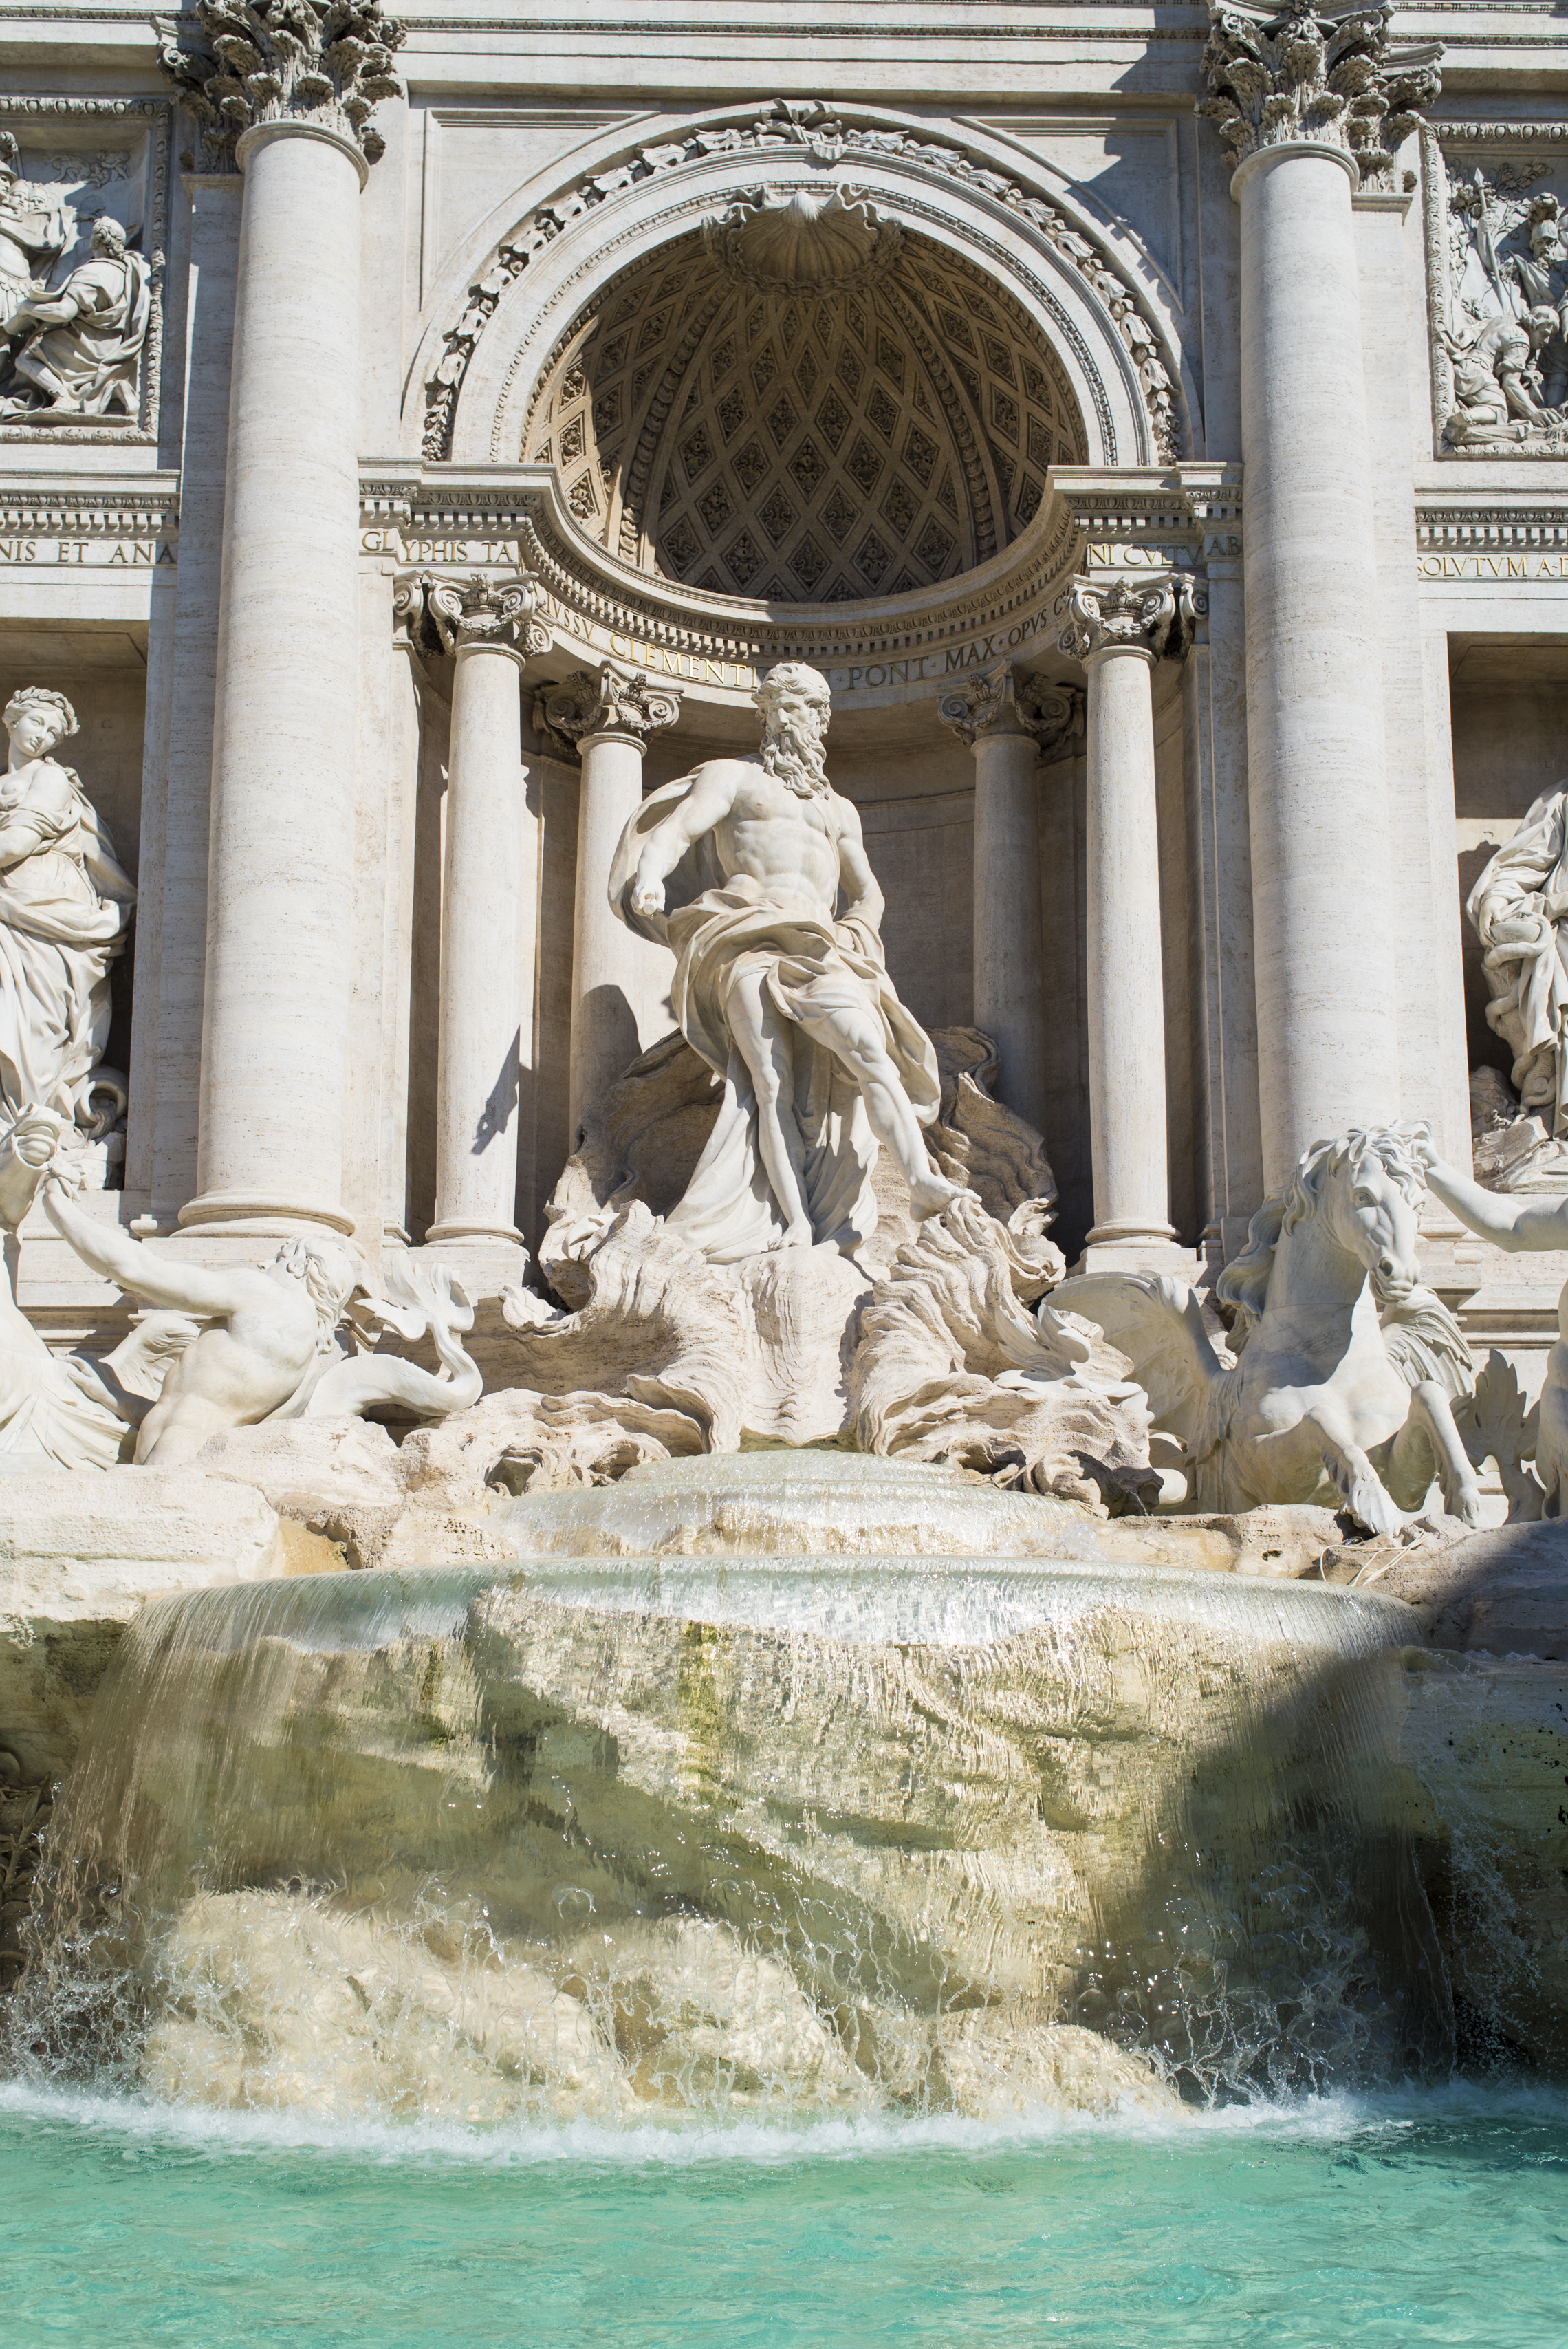 The Best Free Things to do in Rome, Trevi Fountain